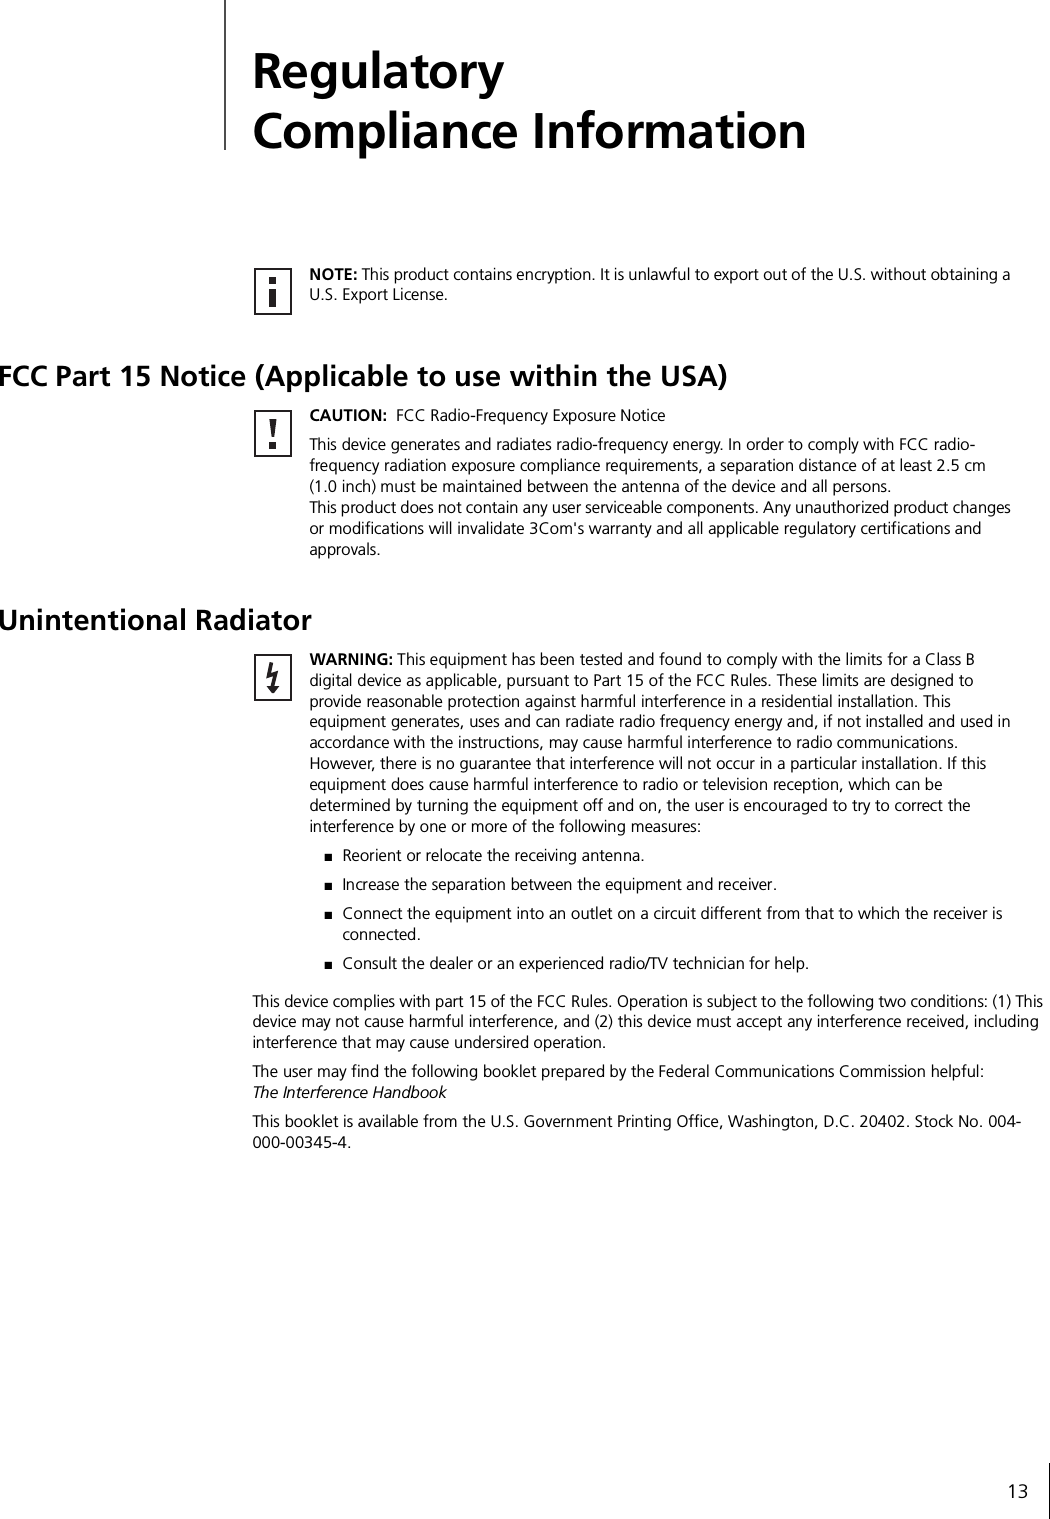 13Regulatory Compliance InformationFCC Part 15 Notice (Applicable to use within the USA)Unintentional RadiatorThis device complies with part 15 of the FCC Rules. Operation is subject to the following two conditions: (1) This device may not cause harmful interference, and (2) this device must accept any interference received, including interference that may cause undersired operation.The user may find the following booklet prepared by the Federal Communications Commission helpful: The Interference HandbookThis booklet is available from the U.S. Government Printing Office, Washington, D.C. 20402. Stock No. 004-000-00345-4. NOTE: This product contains encryption. It is unlawful to export out of the U.S. without obtaining a U.S. Export License.CAUTION:  FCC Radio-Frequency Exposure NoticeThis device generates and radiates radio-frequency energy. In order to comply with FCC radio-frequency radiation exposure compliance requirements, a separation distance of at least 2.5 cm (1.0 inch) must be maintained between the antenna of the device and all persons.This product does not contain any user serviceable components. Any unauthorized product changes or modifications will invalidate 3Com&apos;s warranty and all applicable regulatory certifications and approvals.WARNING: This equipment has been tested and found to comply with the limits for a Class B digital device as applicable, pursuant to Part 15 of the FCC Rules. These limits are designed to provide reasonable protection against harmful interference in a residential installation. This equipment generates, uses and can radiate radio frequency energy and, if not installed and used in accordance with the instructions, may cause harmful interference to radio communications. However, there is no guarantee that interference will not occur in a particular installation. If this equipment does cause harmful interference to radio or television reception, which can be determined by turning the equipment off and on, the user is encouraged to try to correct the interference by one or more of the following measures:■Reorient or relocate the receiving antenna.■Increase the separation between the equipment and receiver.■Connect the equipment into an outlet on a circuit different from that to which the receiver is connected.■Consult the dealer or an experienced radio/TV technician for help.